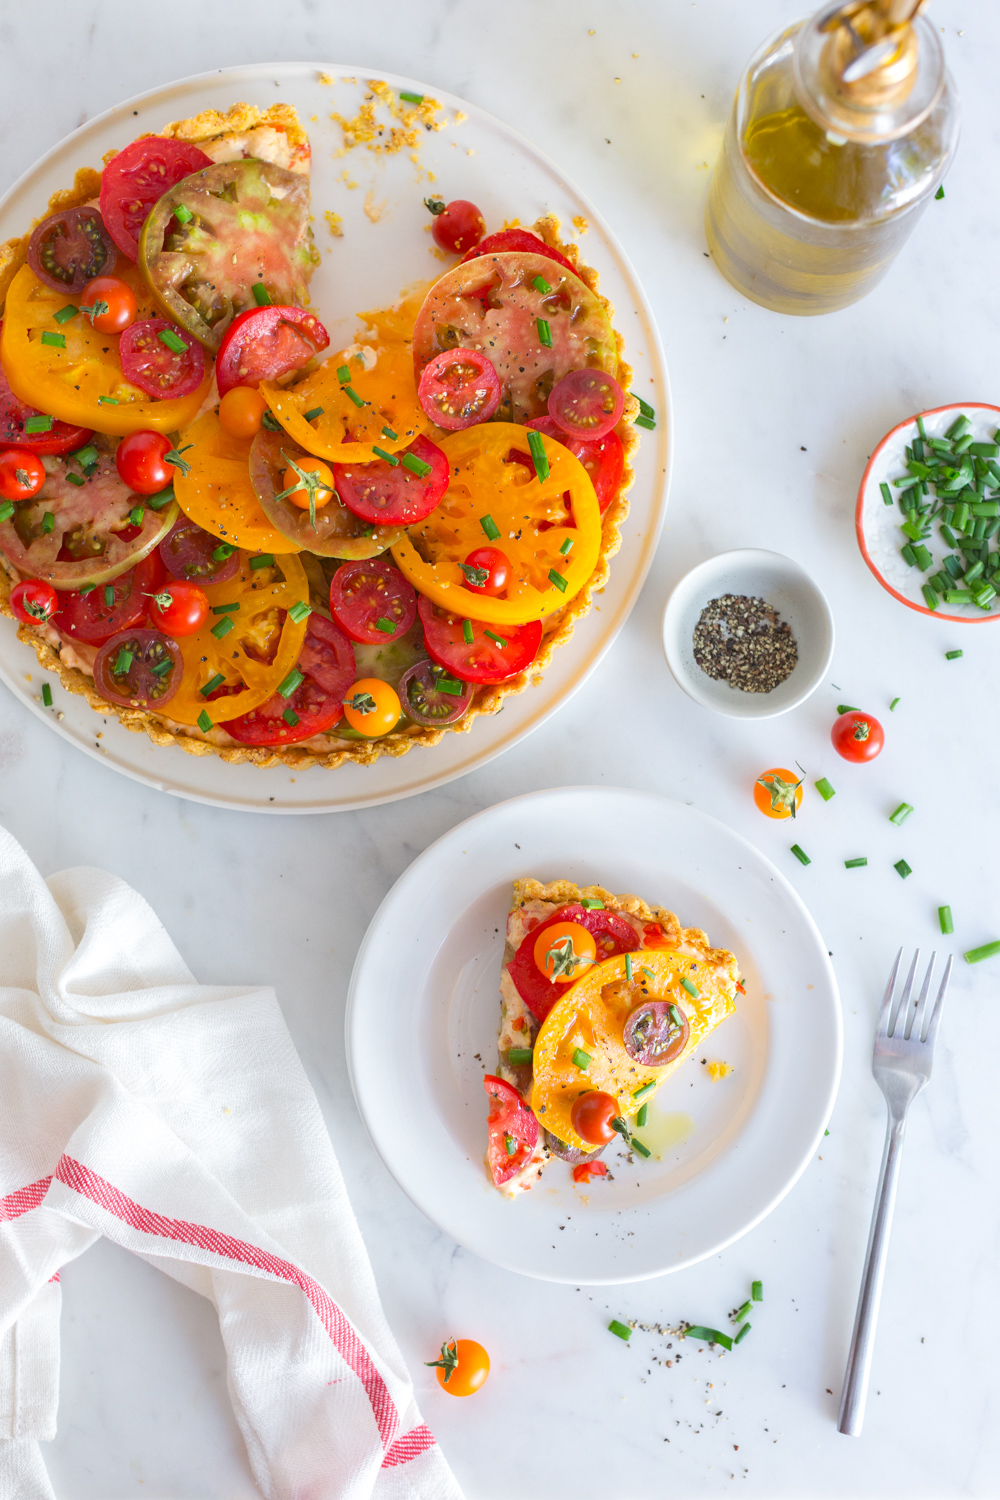 Sliced Heirloom Tomato and Pimento Cheese Tart with Cornmeal Crust-3